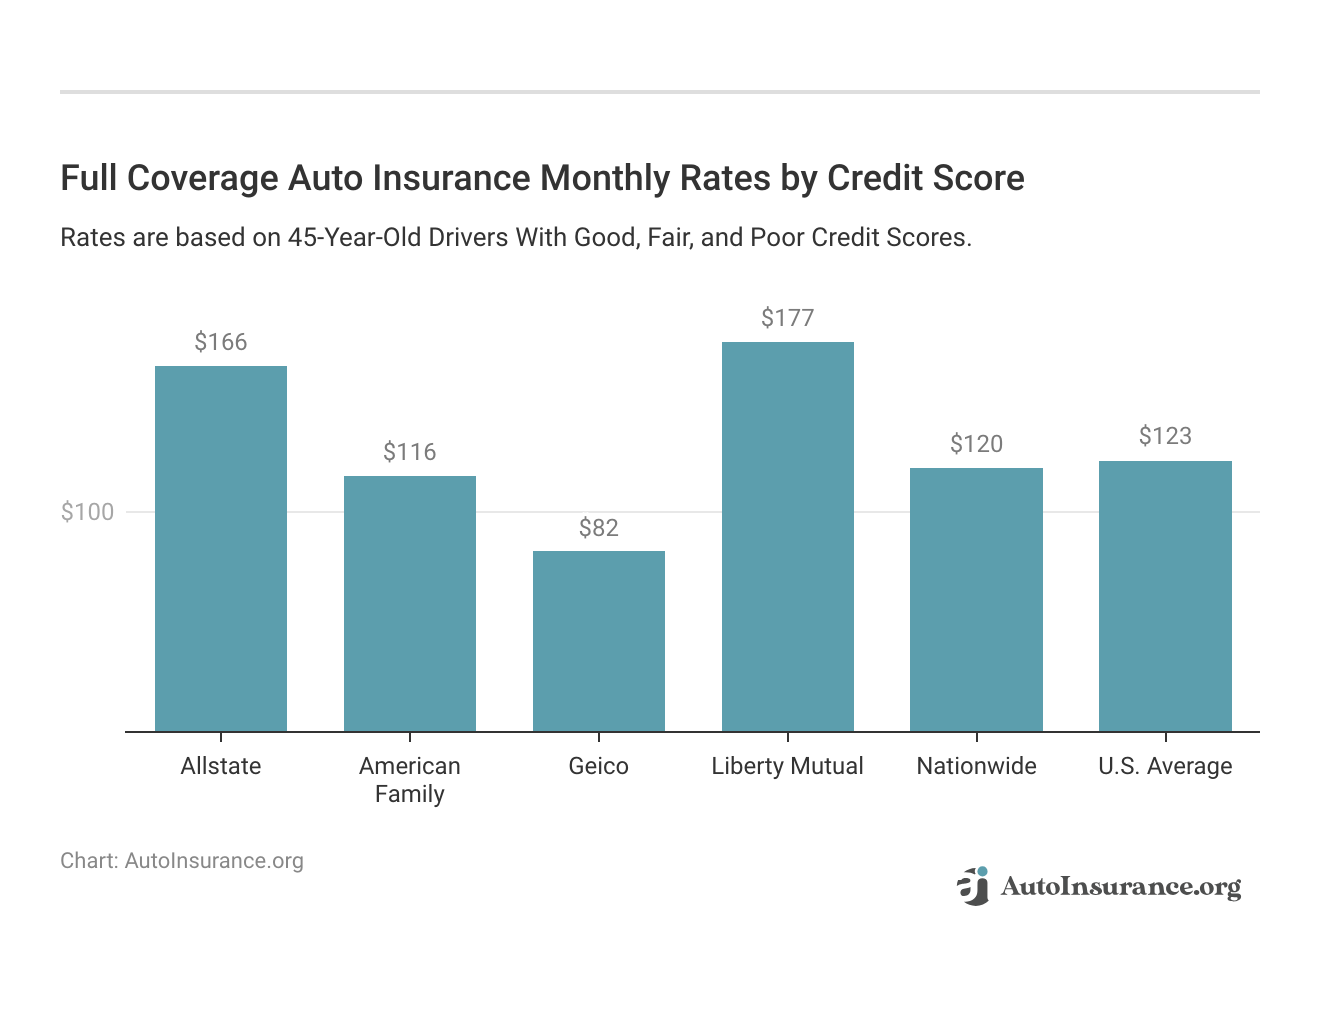 <h3>Full Coverage Auto Insurance Monthly Rates by Credit Score</h3>